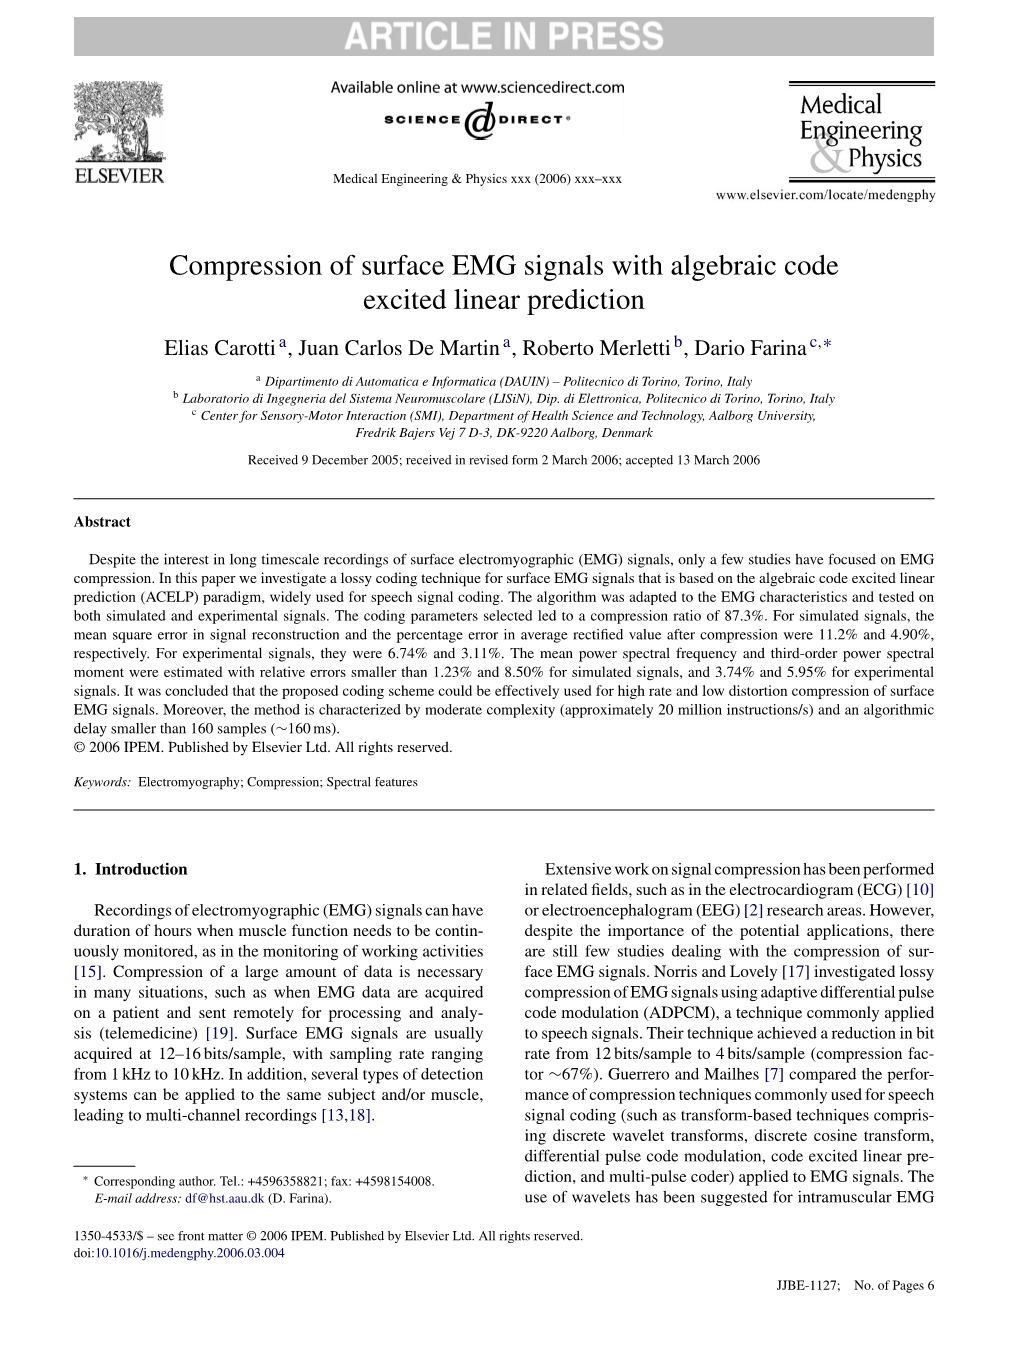 Compression of Surface EMG Signals with Algebraic Code Excited Linear Prediction